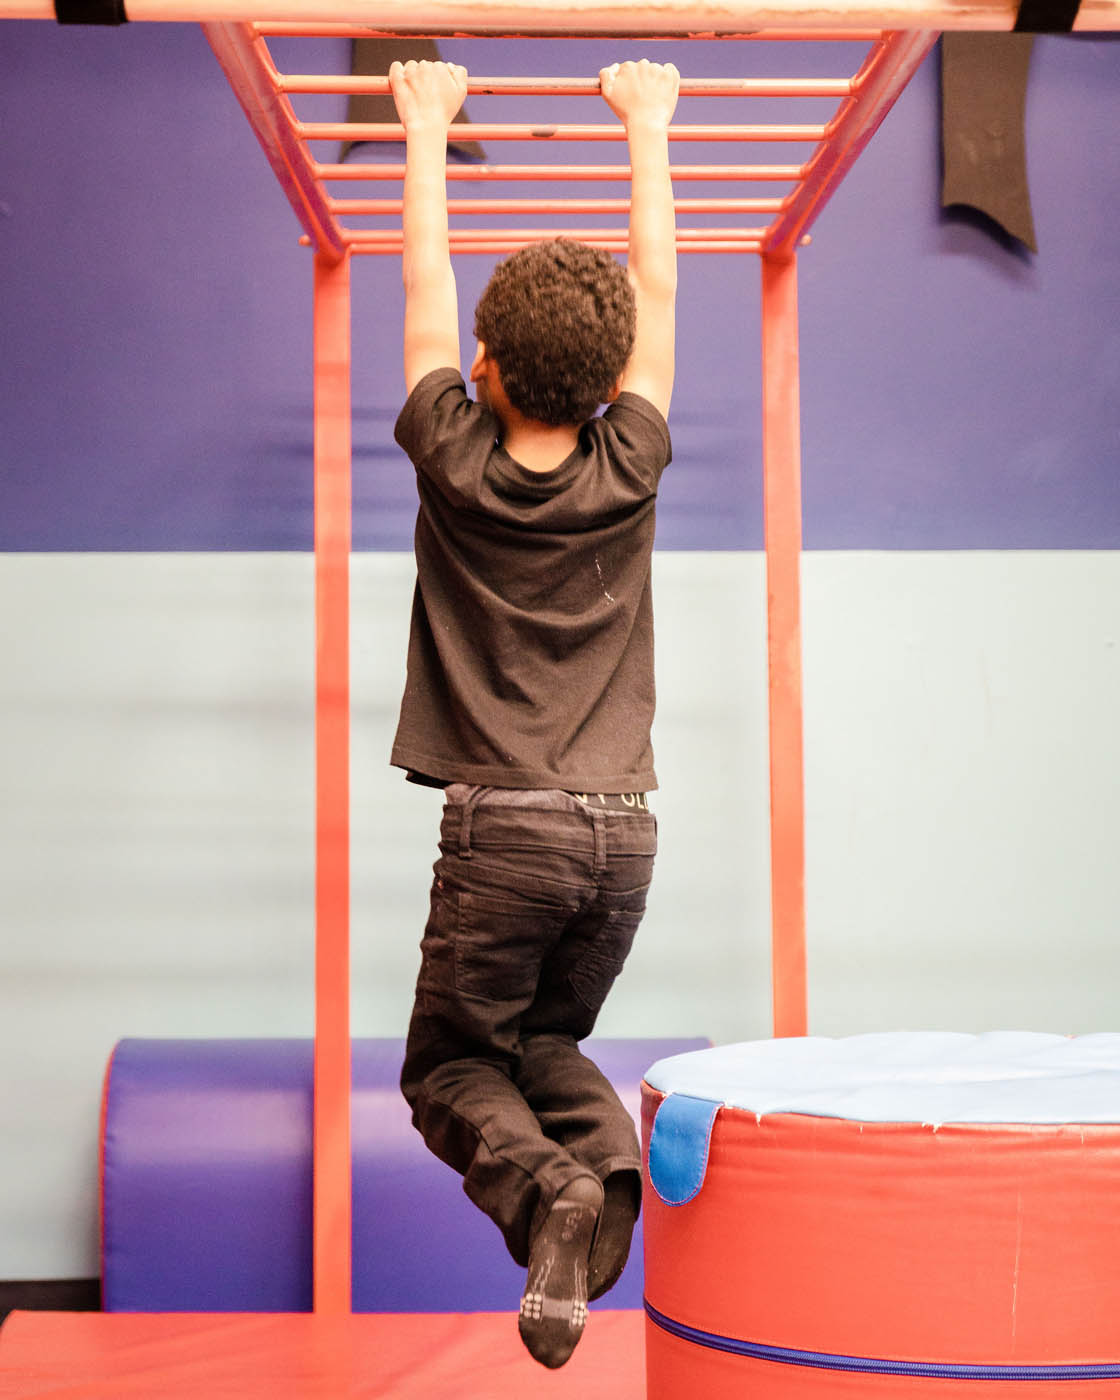 A little boy hanging on monkey bars, contact us today about our baby groups in Midlothian, VA.